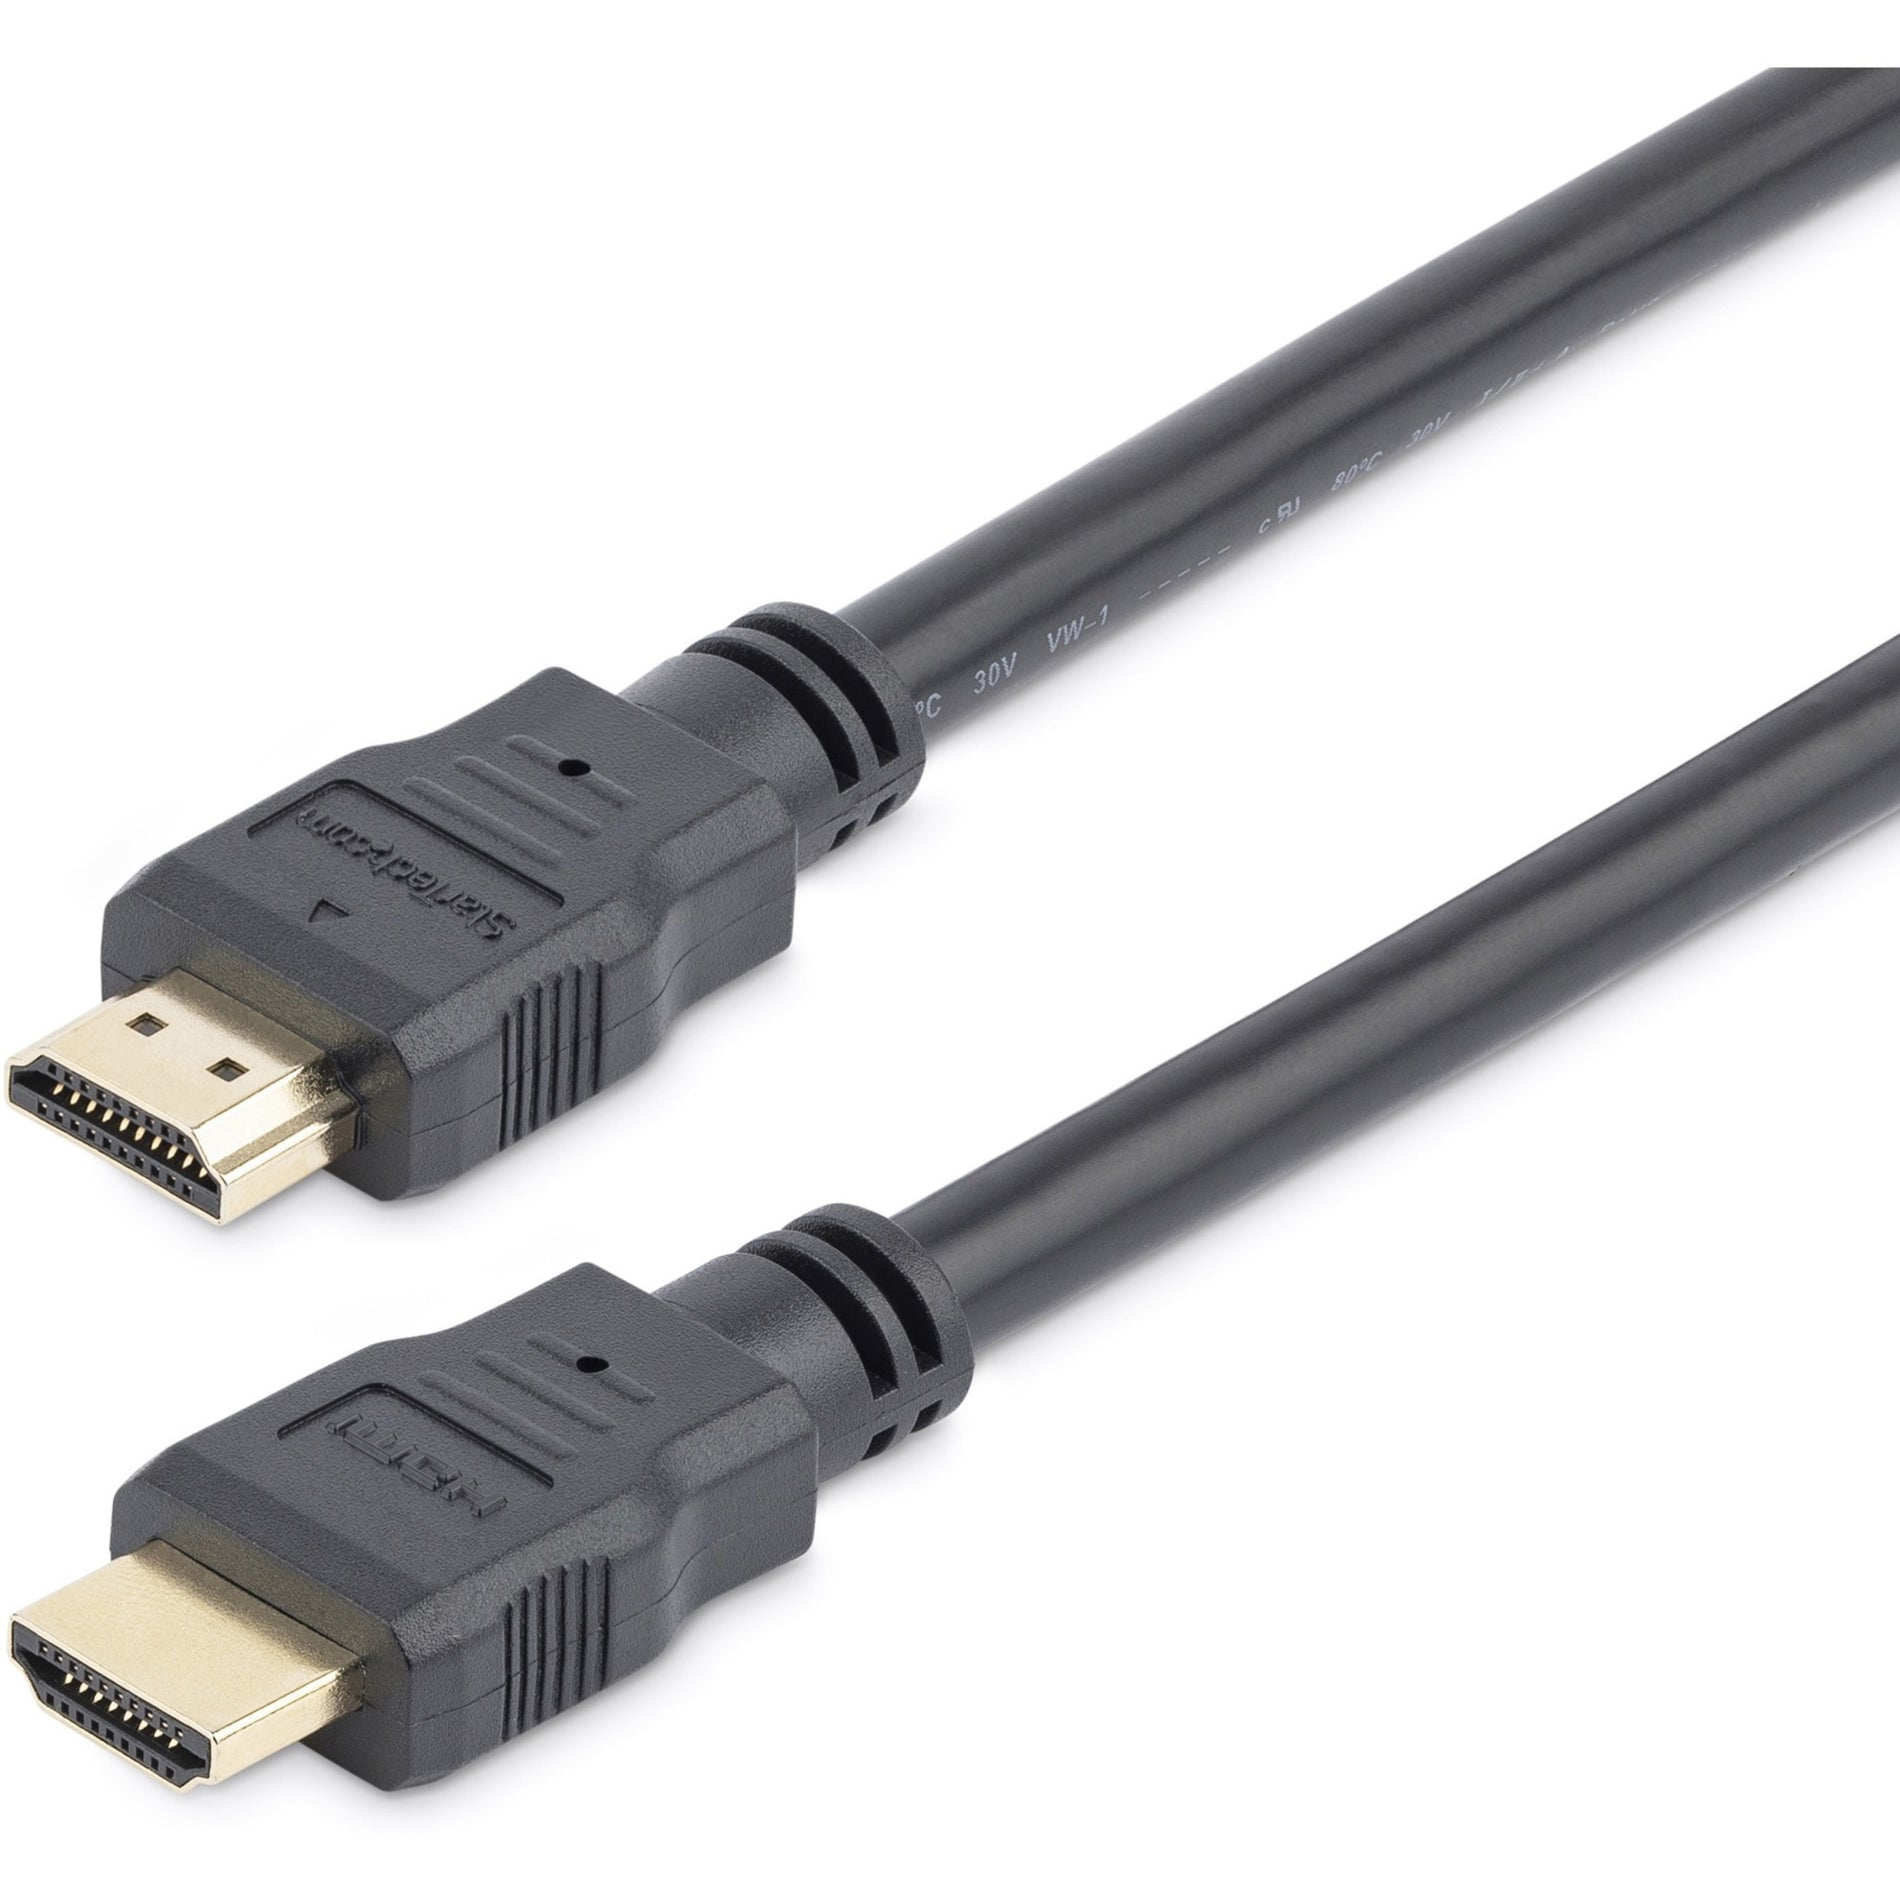 StarTech.com HDMM3M 3m High Speed HDMI Cable - Ultra HD 4k x 2k HDMI Cable, Molded, Strain Relief, Corrosion Resistant, Gold Plated Connectors